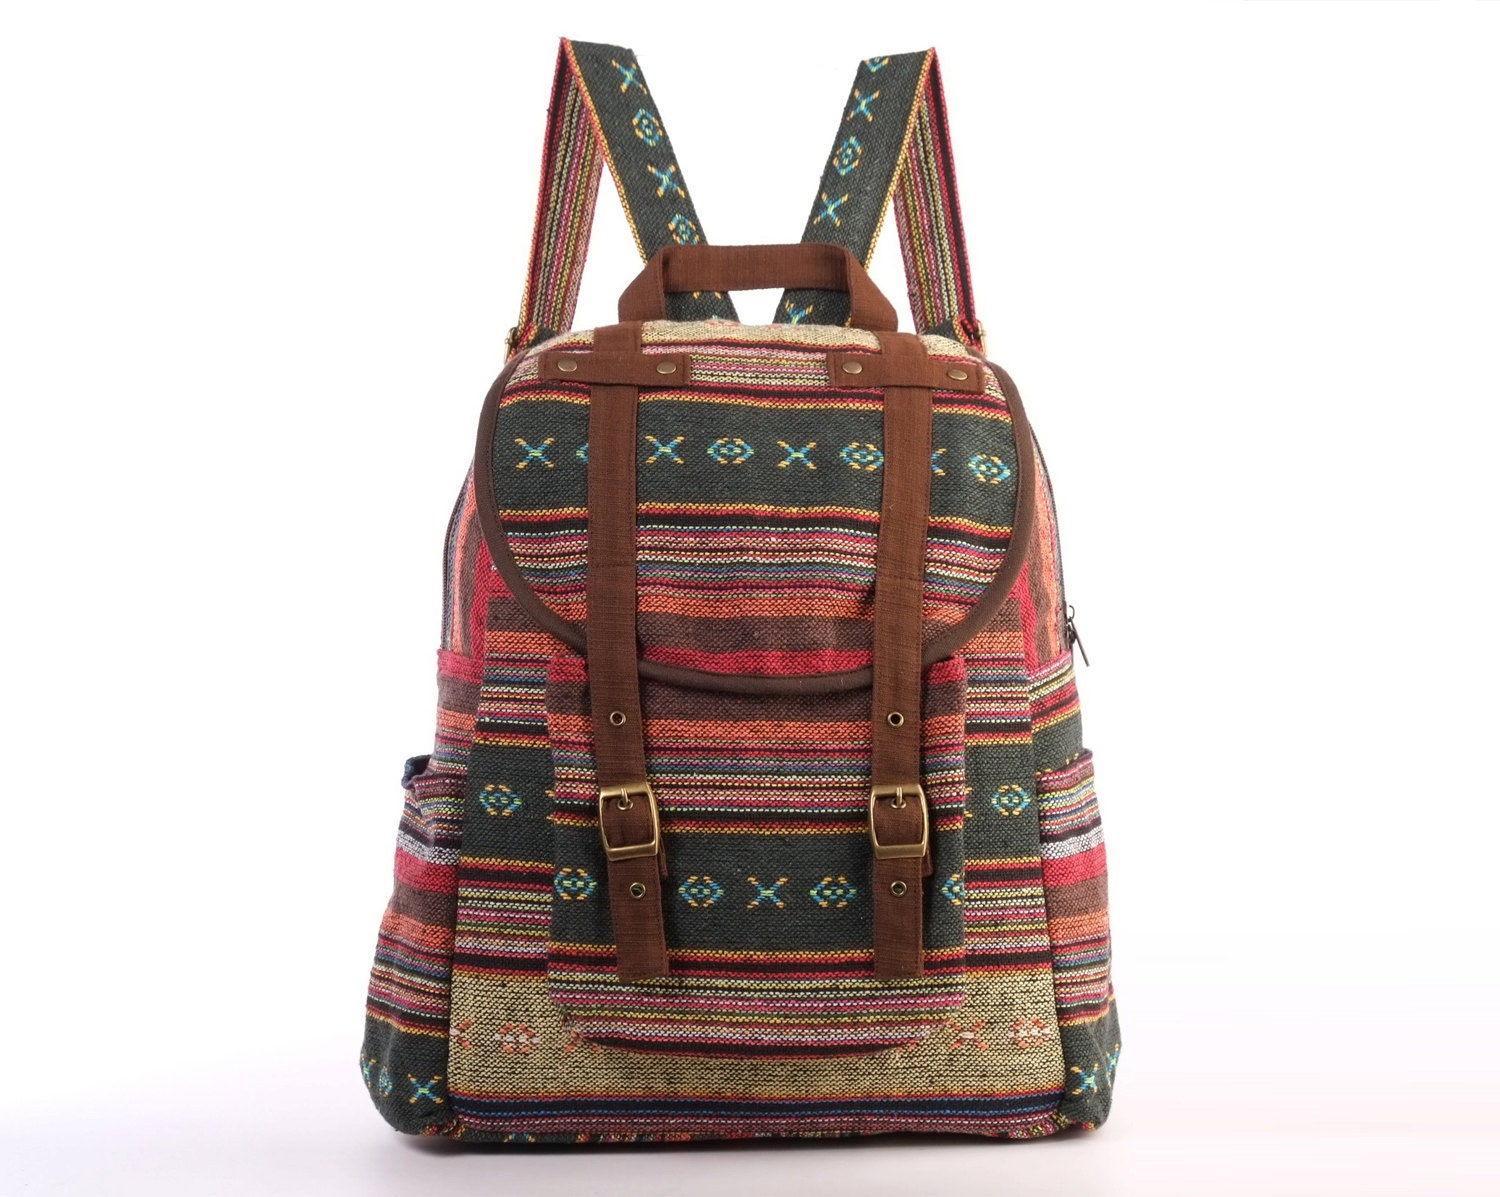 Woven Backpack Ethnic Tribes Rustic Folk Traditional Bag